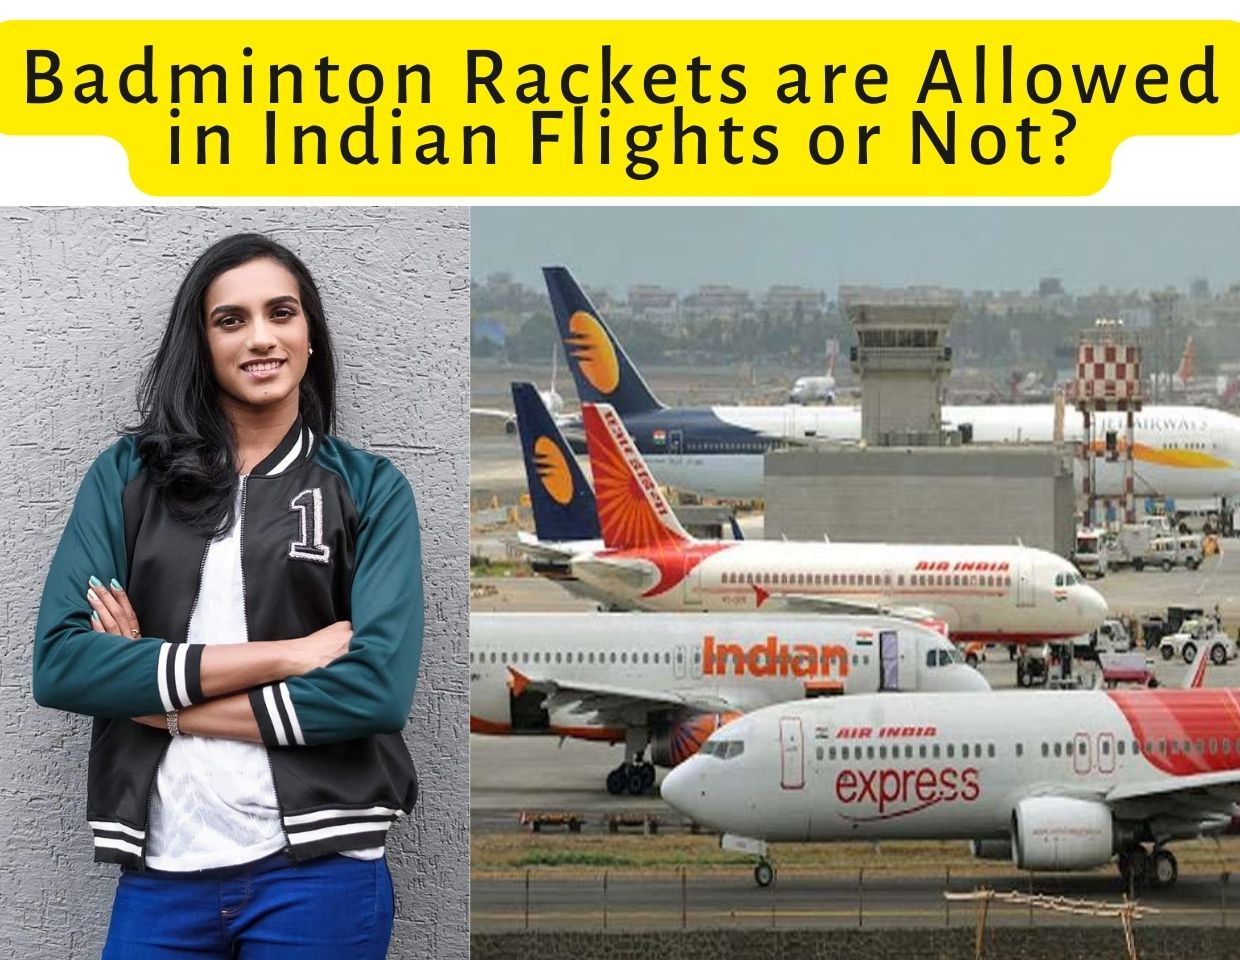 Badminton Rackets are Allowed in Indian Flights or Not